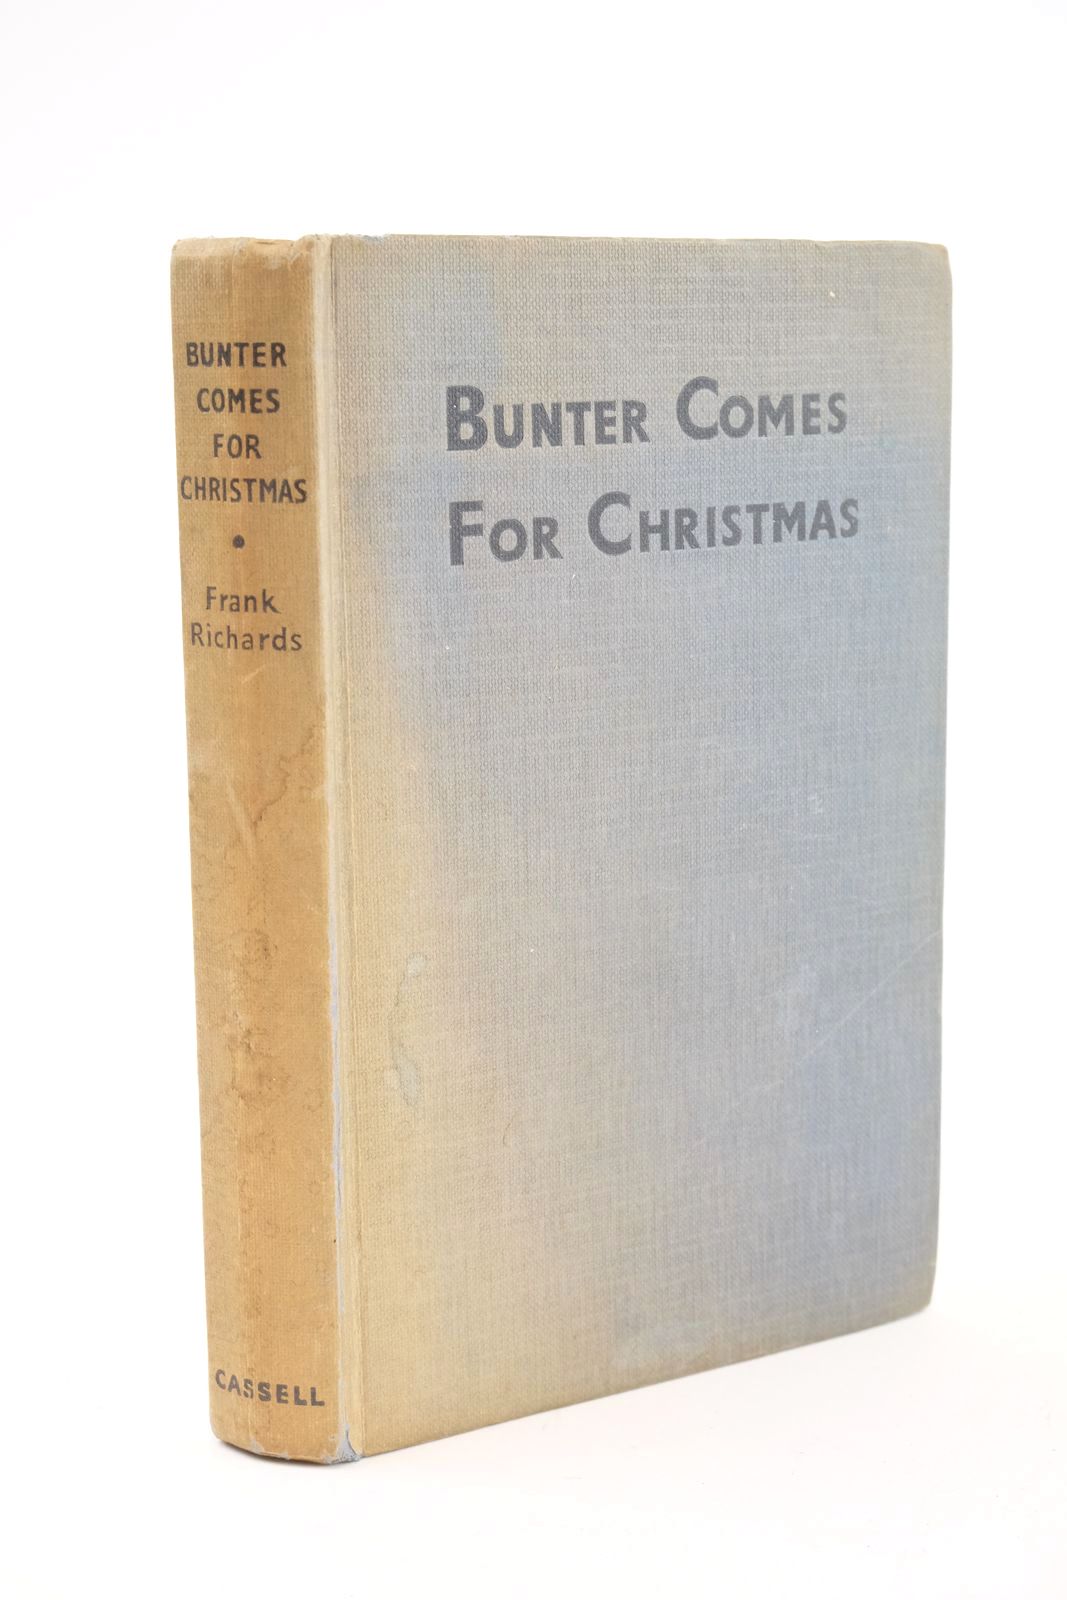 Photo of BUNTER COMES FOR CHRISTMAS- Stock Number: 1323961